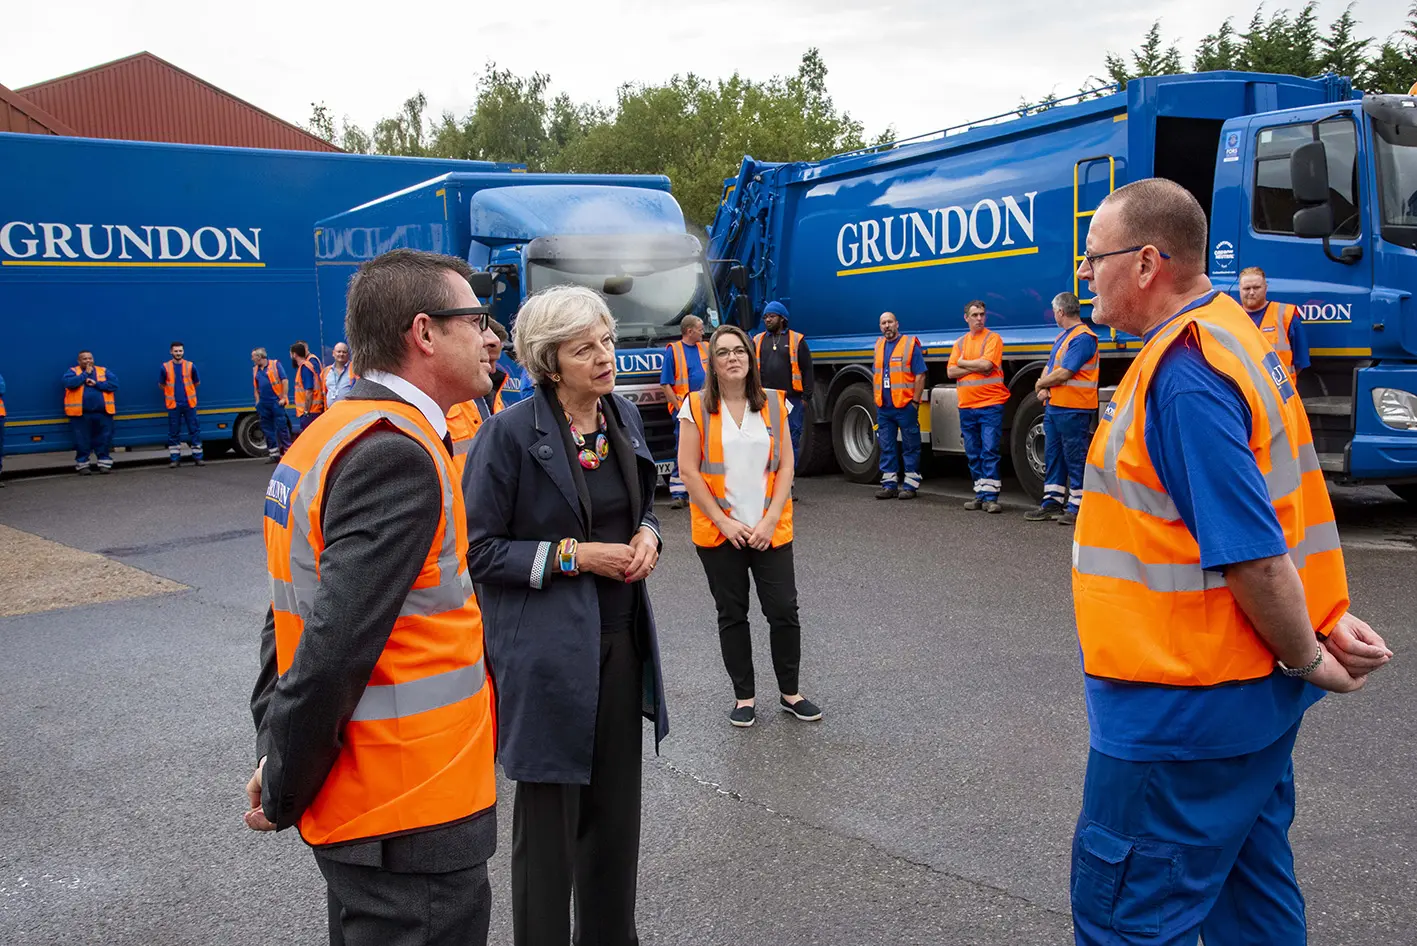 During her visit, Theresa May MP met some of the specialist clinical waste drivers and treatment facility operators, plus other members of the Knowl Hill team, including Mark Padgham (left) and Graham Dunstan (right)